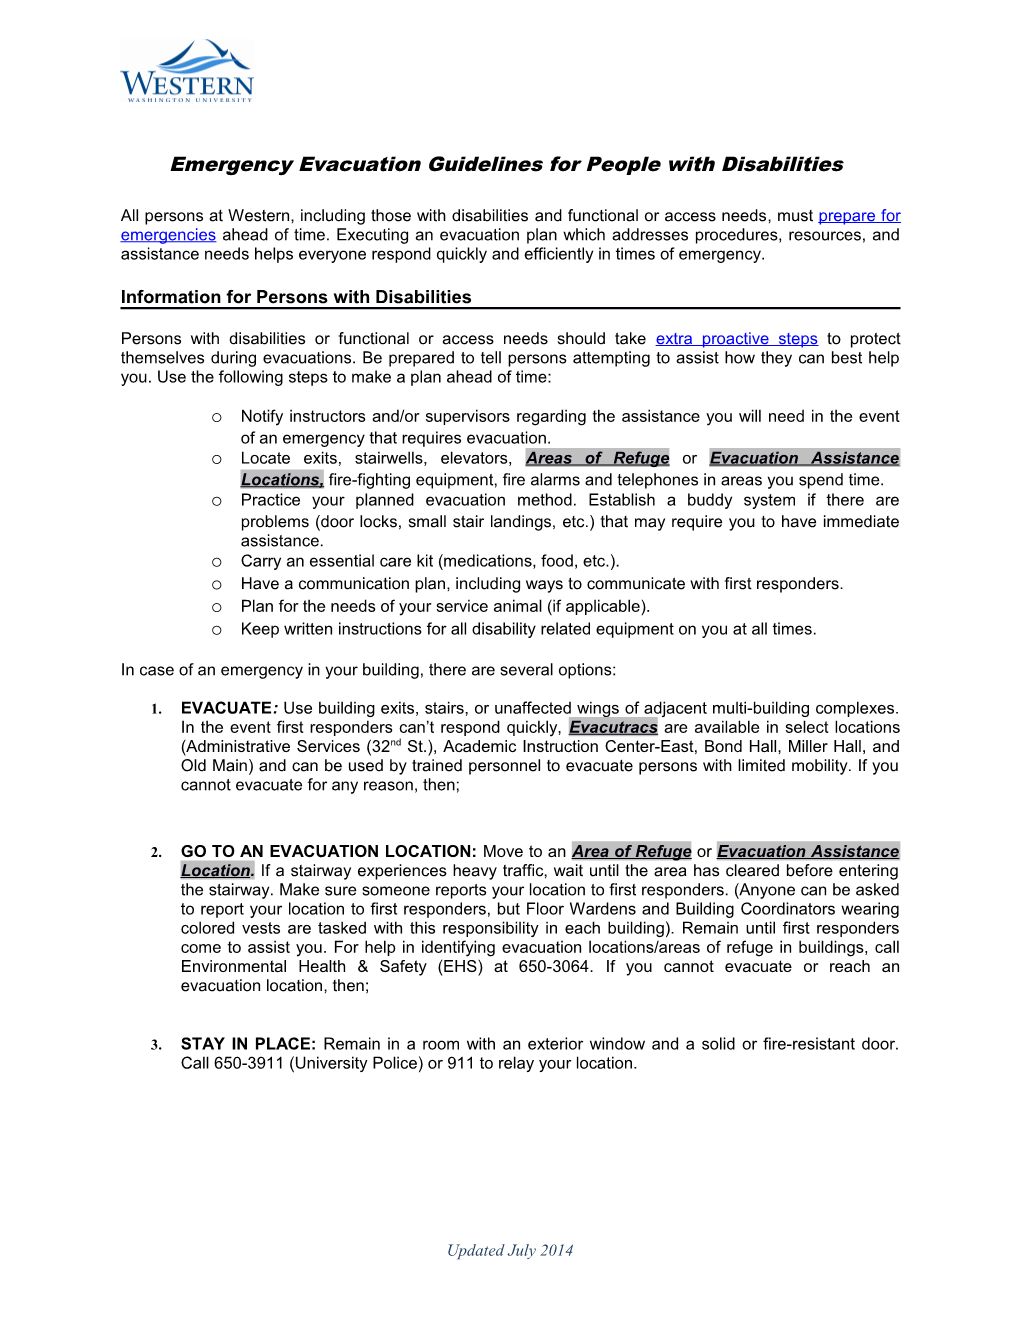 Emergency Evacuation Guidelines for People with Disabilities